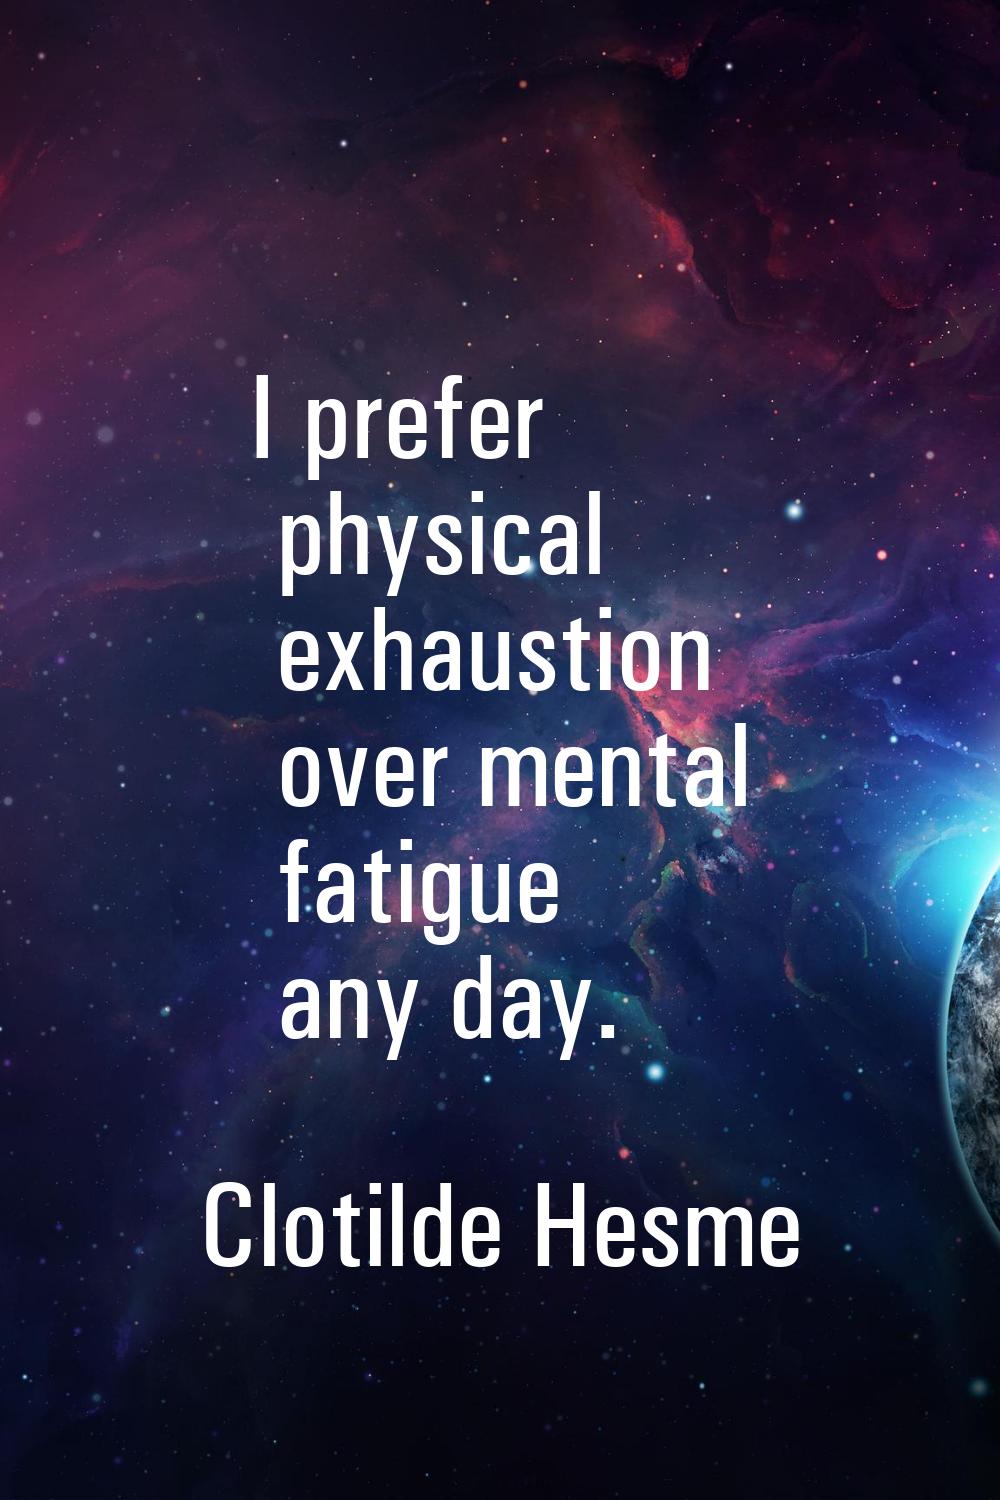 I prefer physical exhaustion over mental fatigue any day.